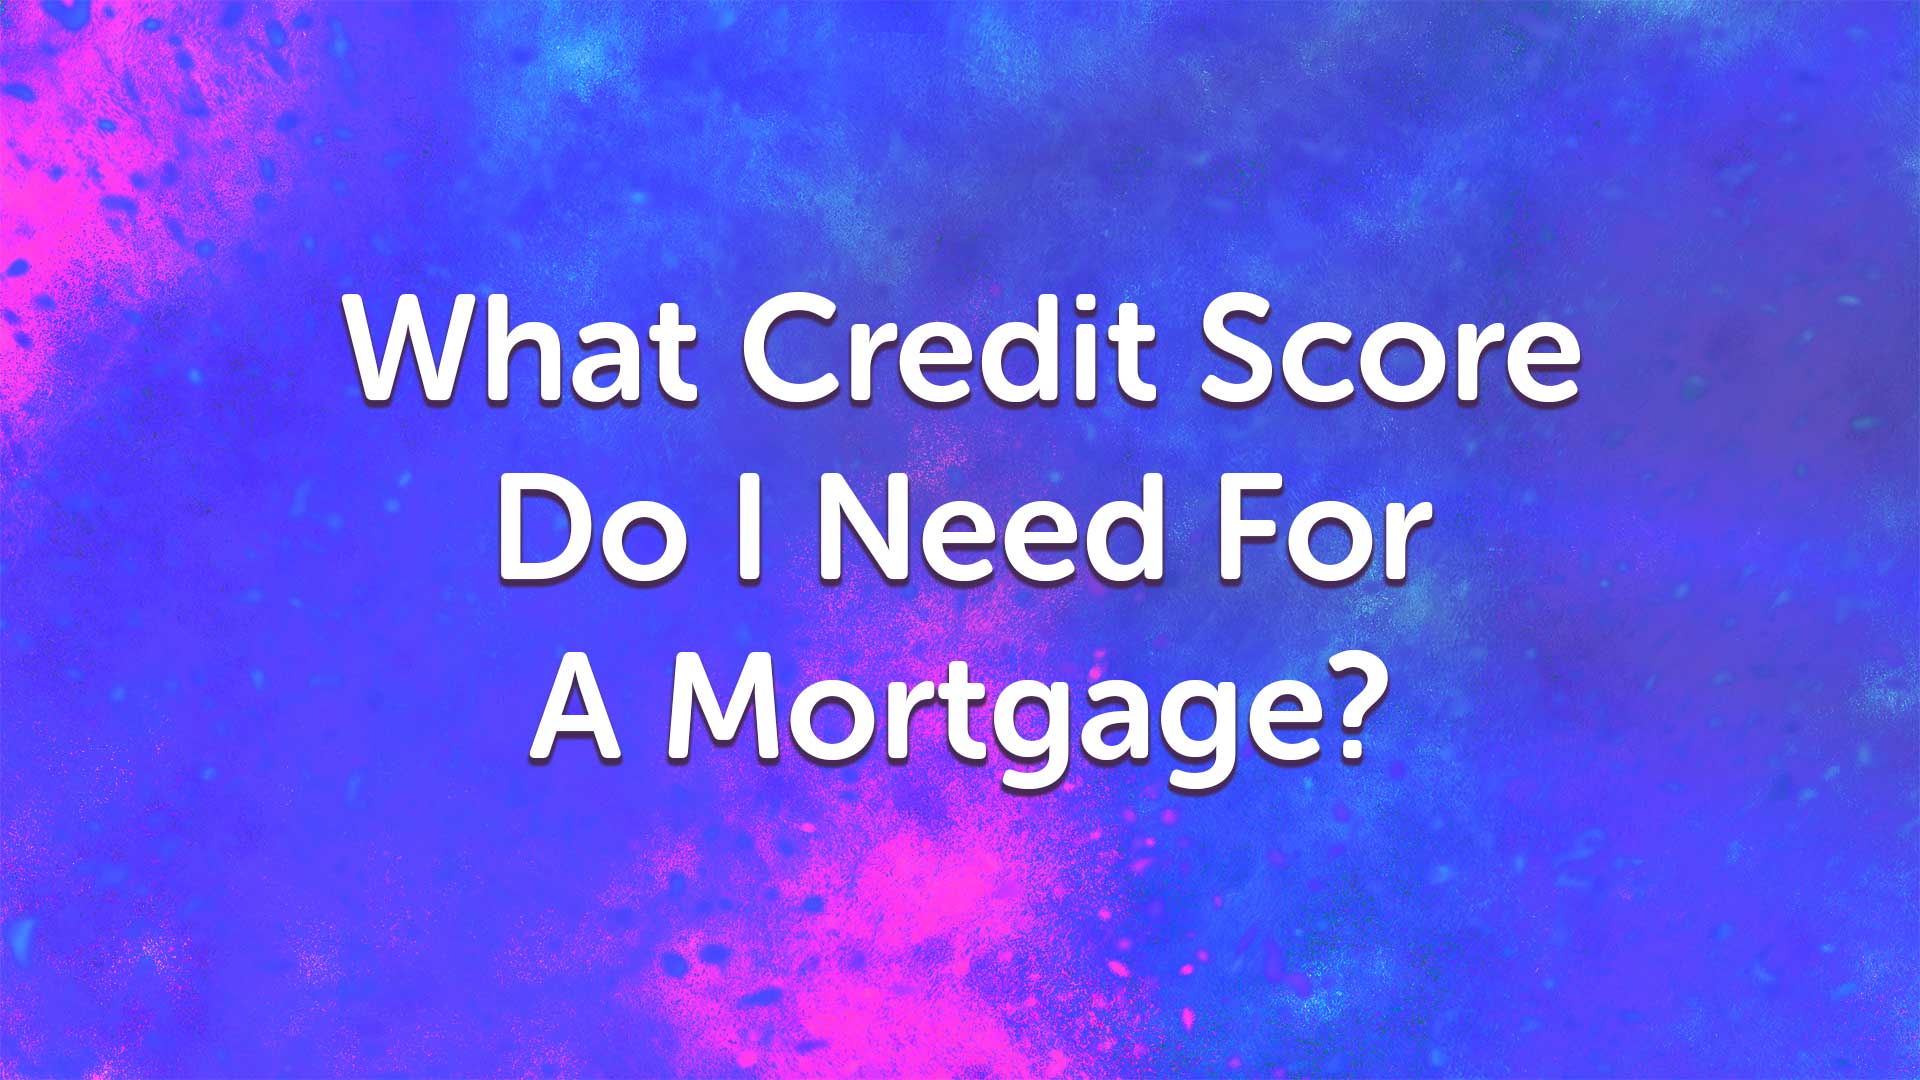 What Credit Score Do I Need for a Mortgage in Manchester